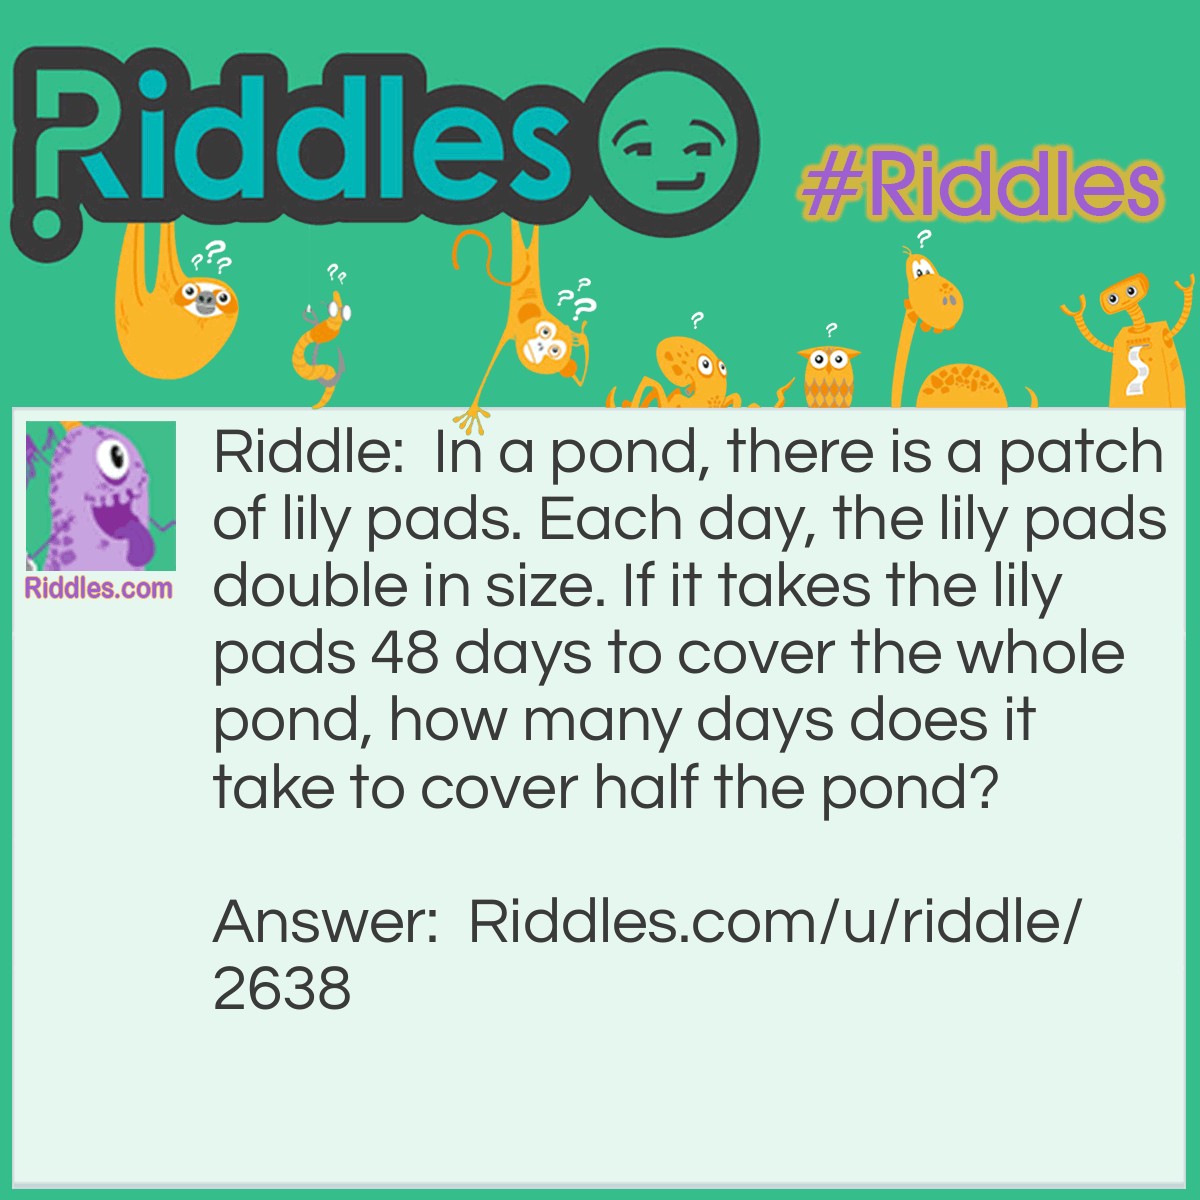 Riddle: In a pond, there is a patch of lily pads. Each day, the lily pads double in size. If it takes the lily pads 48 days to cover the whole pond, how many days does it take to cover half the pond? Answer: 47 days. Whatever day the lily pads covered half the pond, the whole pond would be covered the next day.